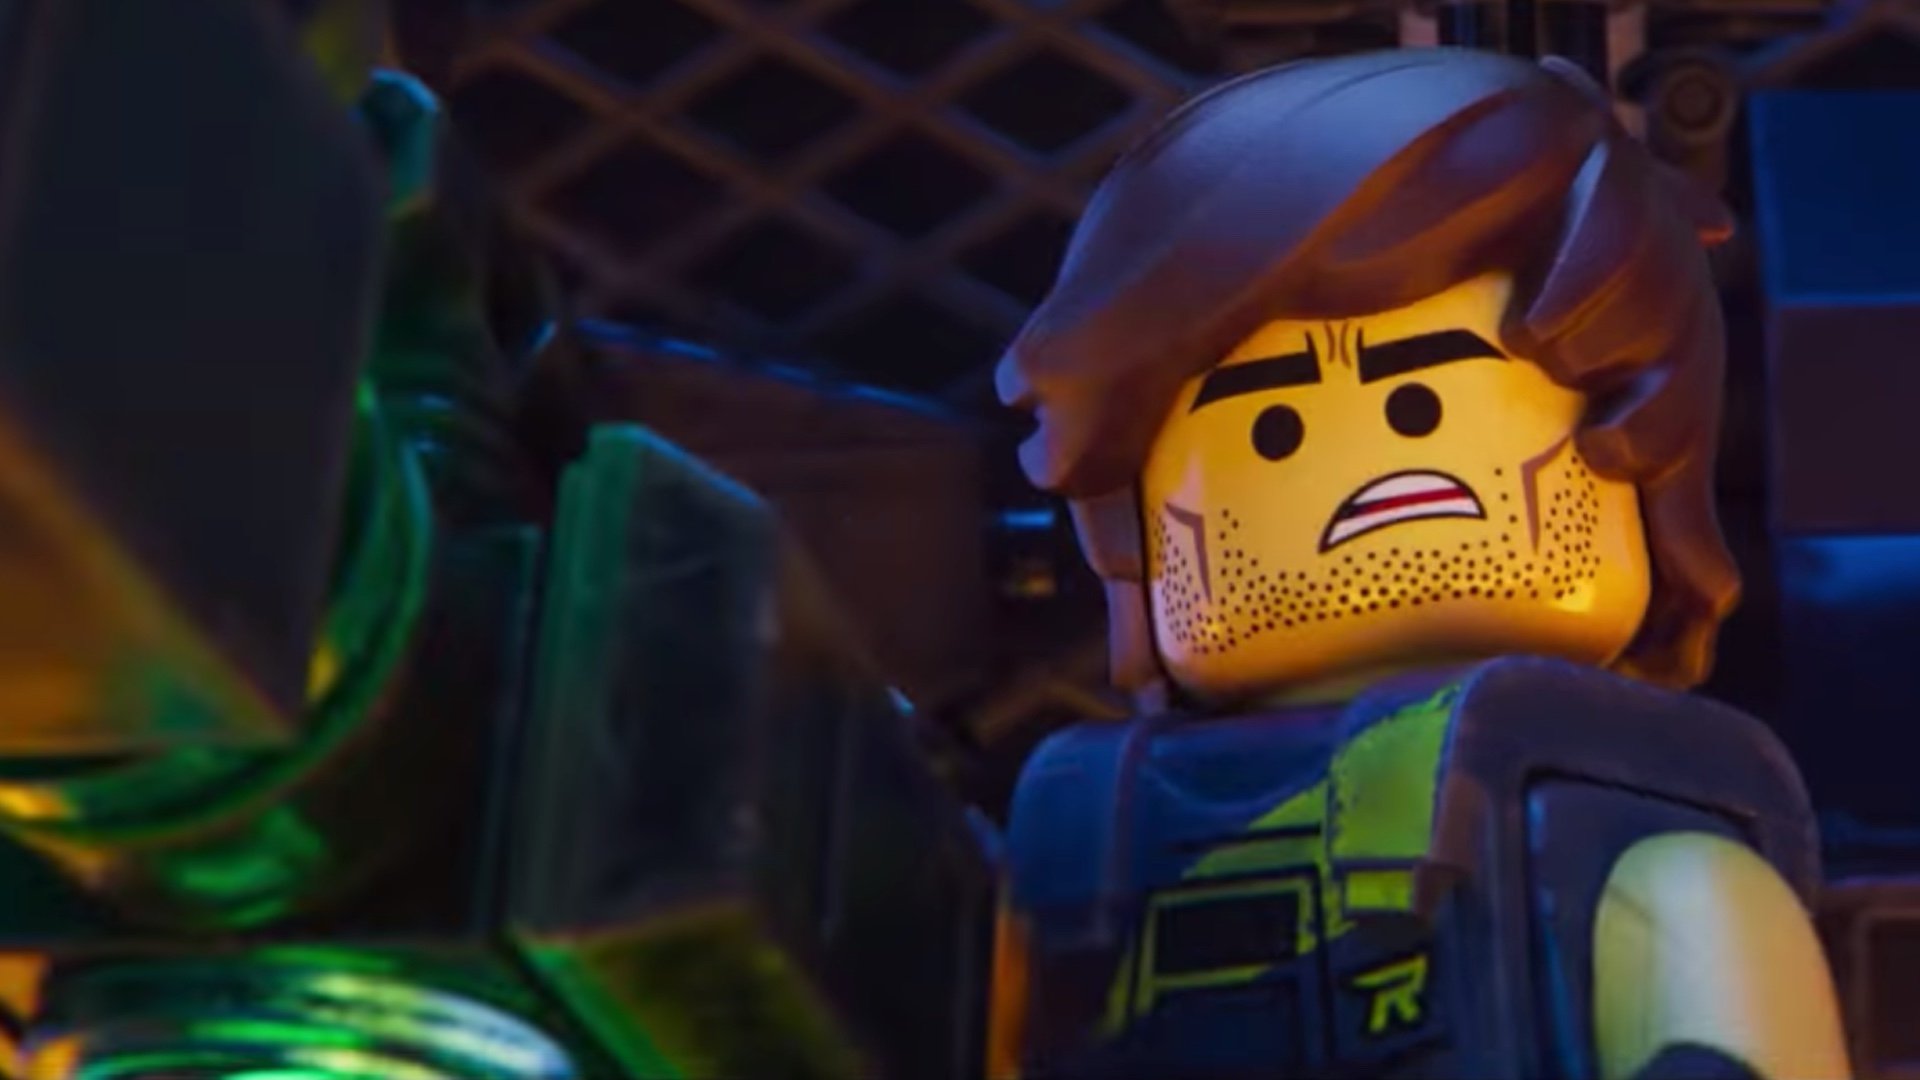 A scene from The Lego Movie 2: The Second Part